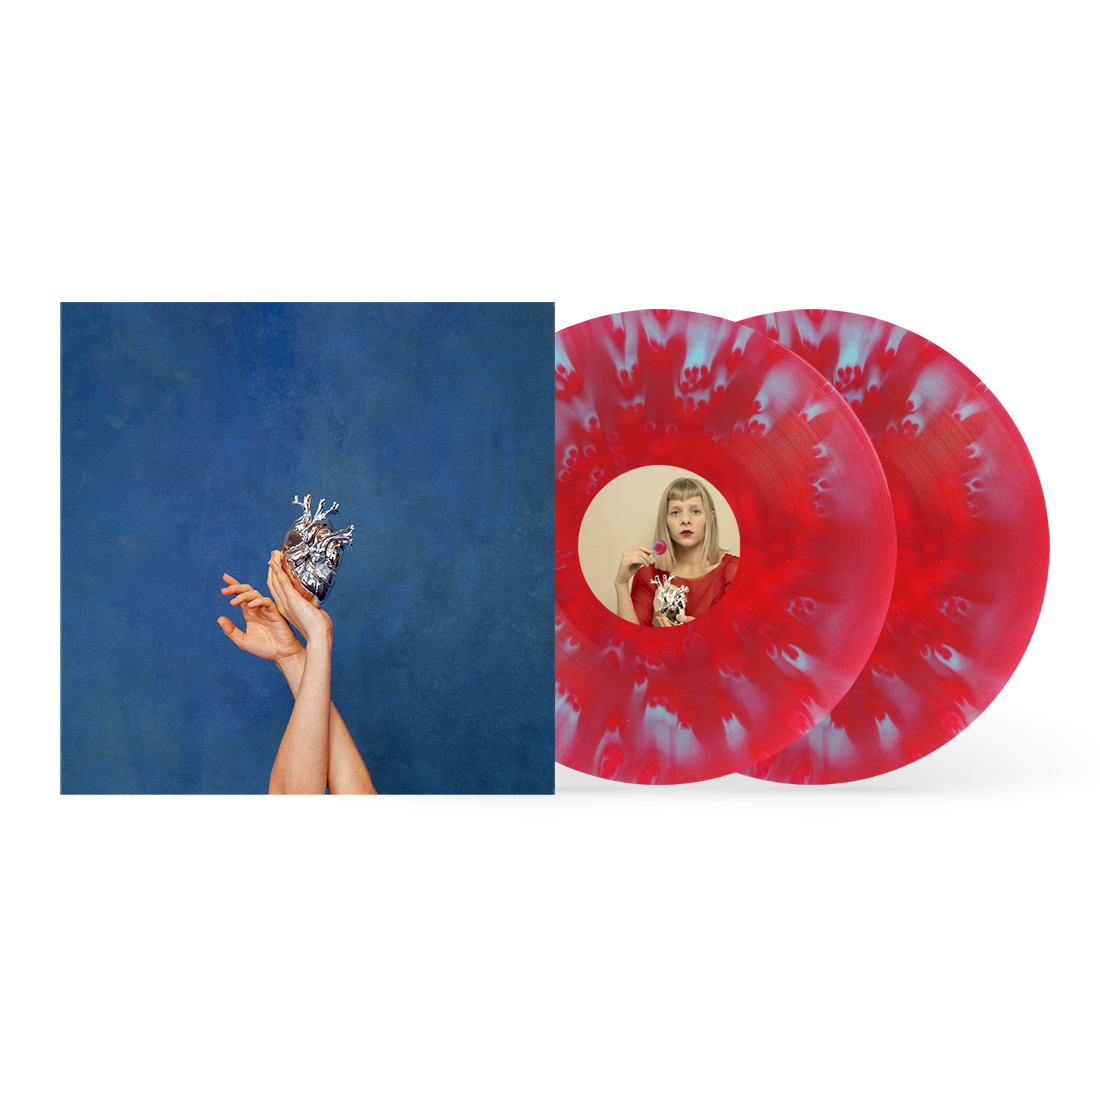 What Happened To The Heart? Limited Red/Blue Vinyl 2LP + Signed Art Card